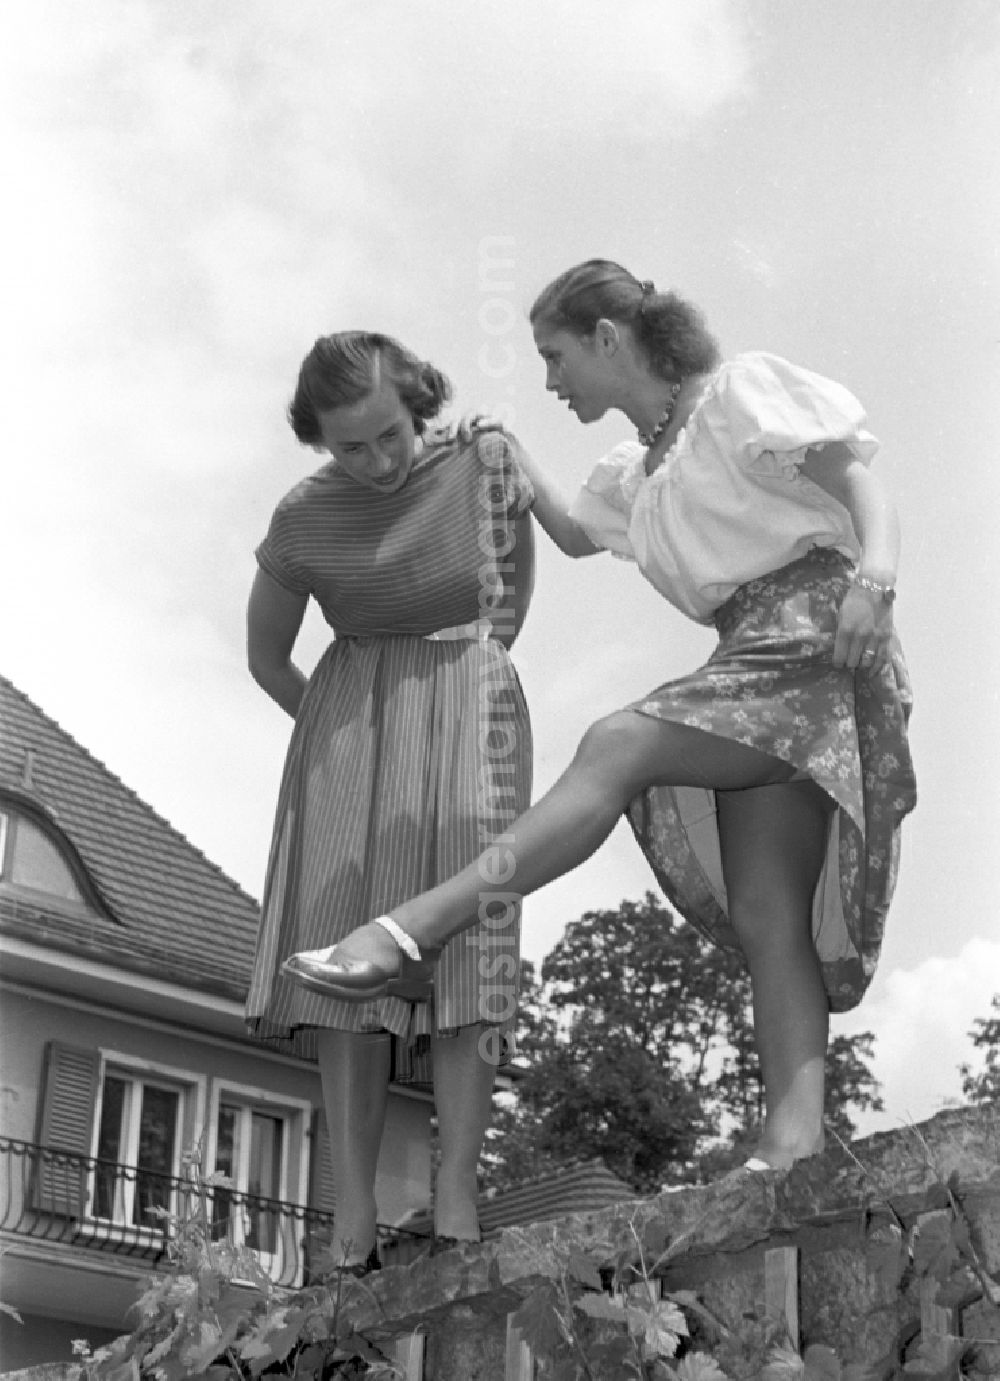 GDR photo archive: Berlin - Young woman presents current women's fashion collection mit Nylonstruempfen - Perlonstruempfen in the district Friedrichshain in Berlin Eastberlin on the territory of the former GDR, German Democratic Republic